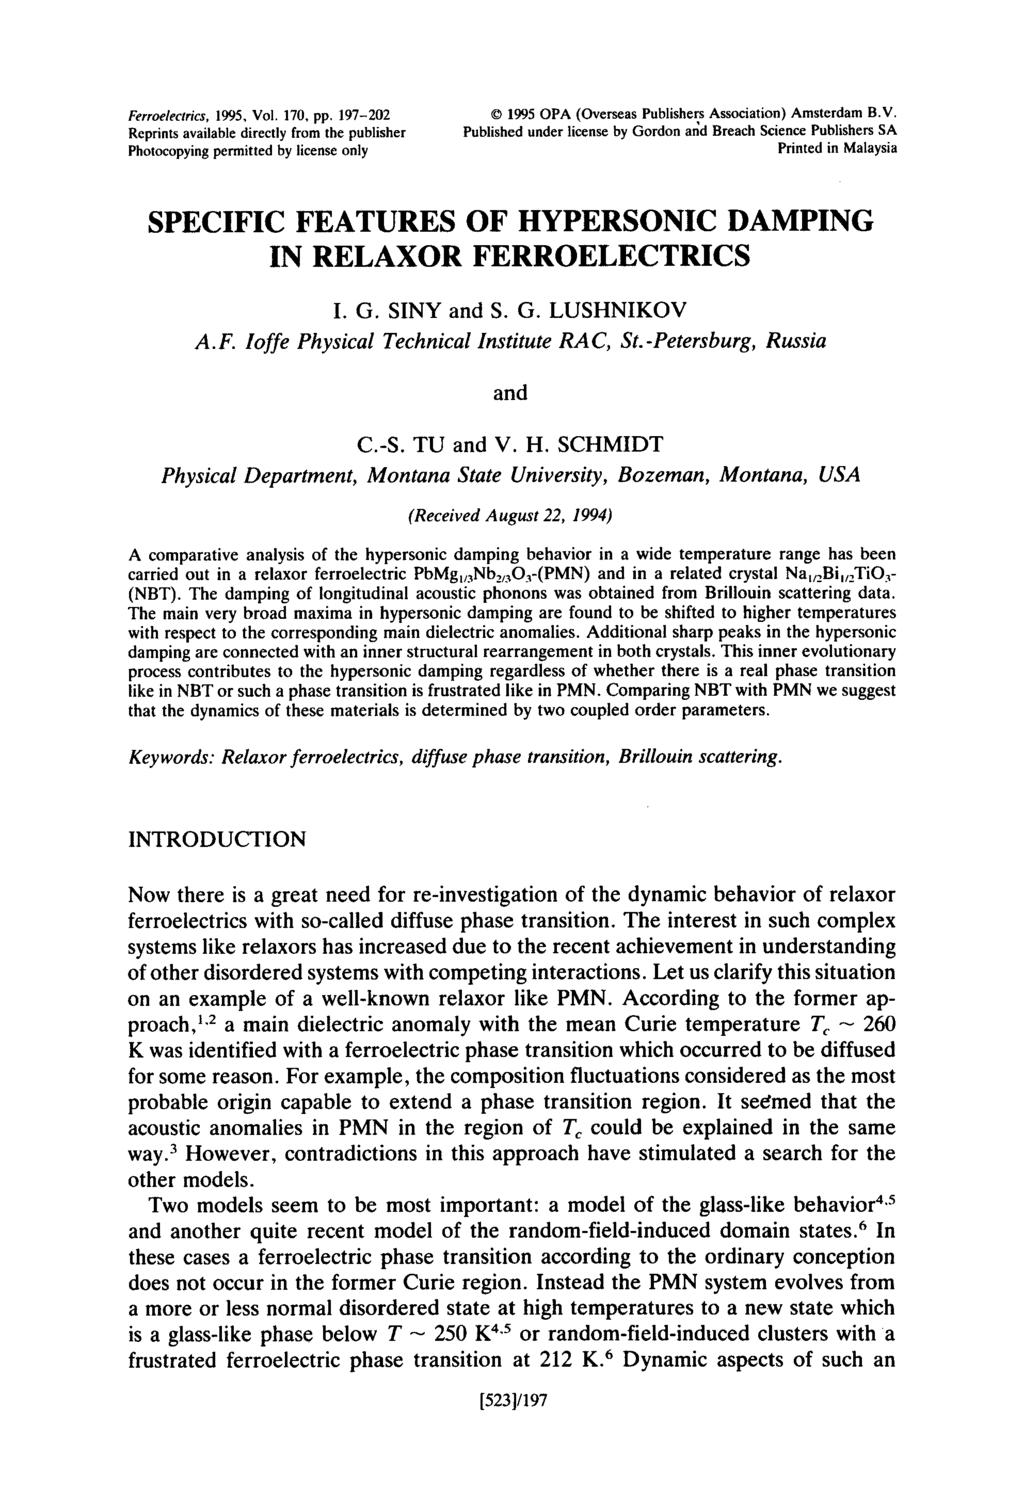 Ferrwlerrrics, 1995, Vol. 170, pp. 197-202 Reprints available directly from the publisher Photocopying permitted by license only 0 199.5 OPA (Overseas Publishers Association) Amsterdam B.V. Published under license by Gordon aid Breach Science Publishers SA Printed in Malaysia SPECIFIC FEATURES OF HYPERSONIC DAMPING IN RELAXOR FERROELECTRICS I.